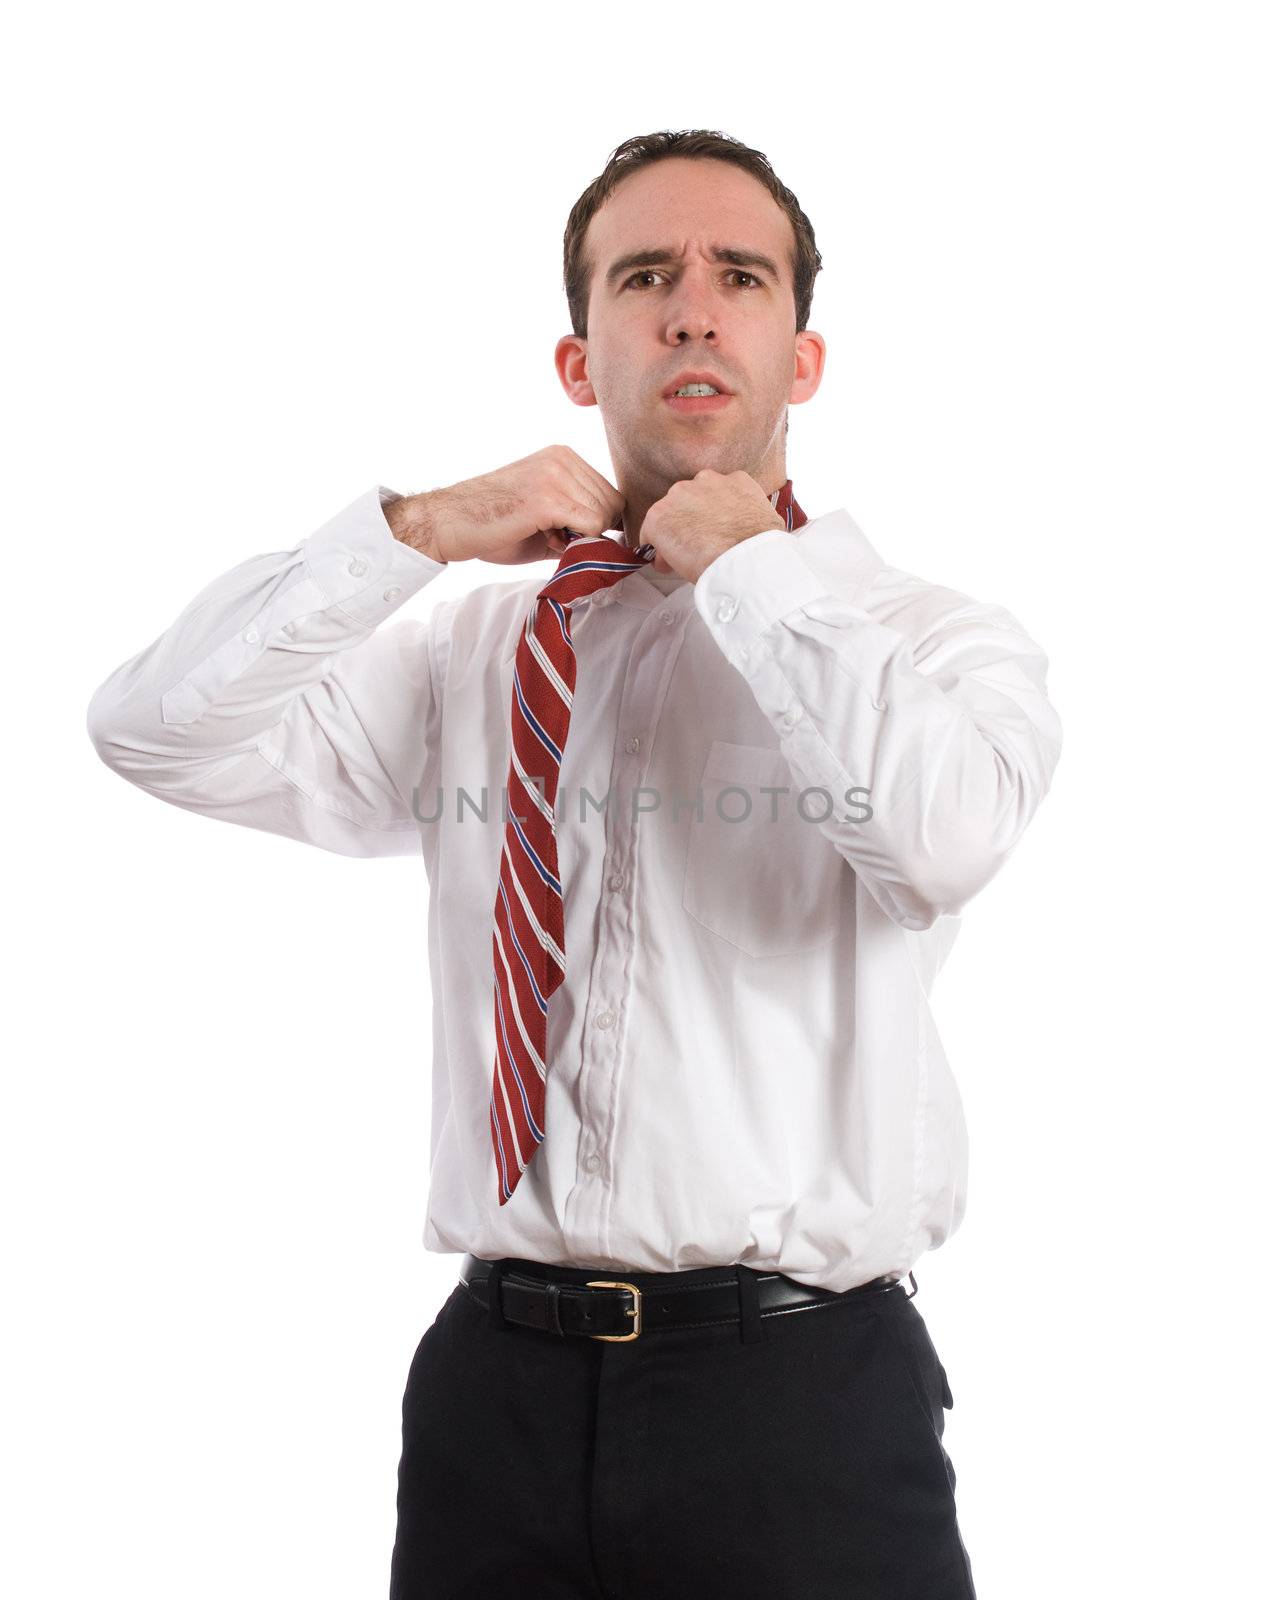 A frustrated businessman loosening his tie, isolated against a white background